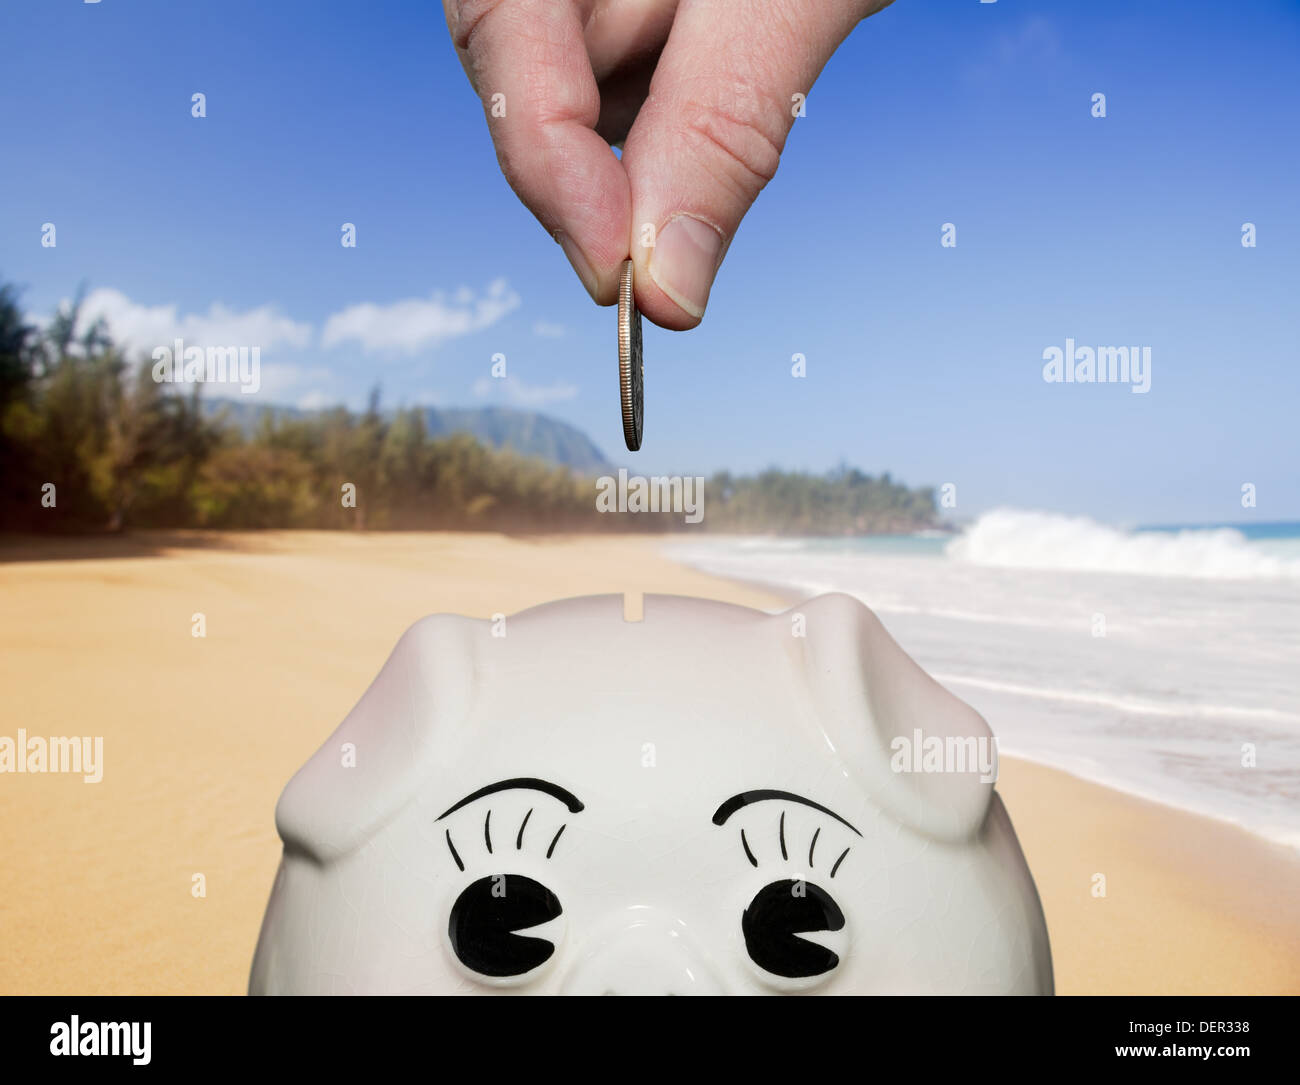 Saving for holiday / vacation concept Stock Photo